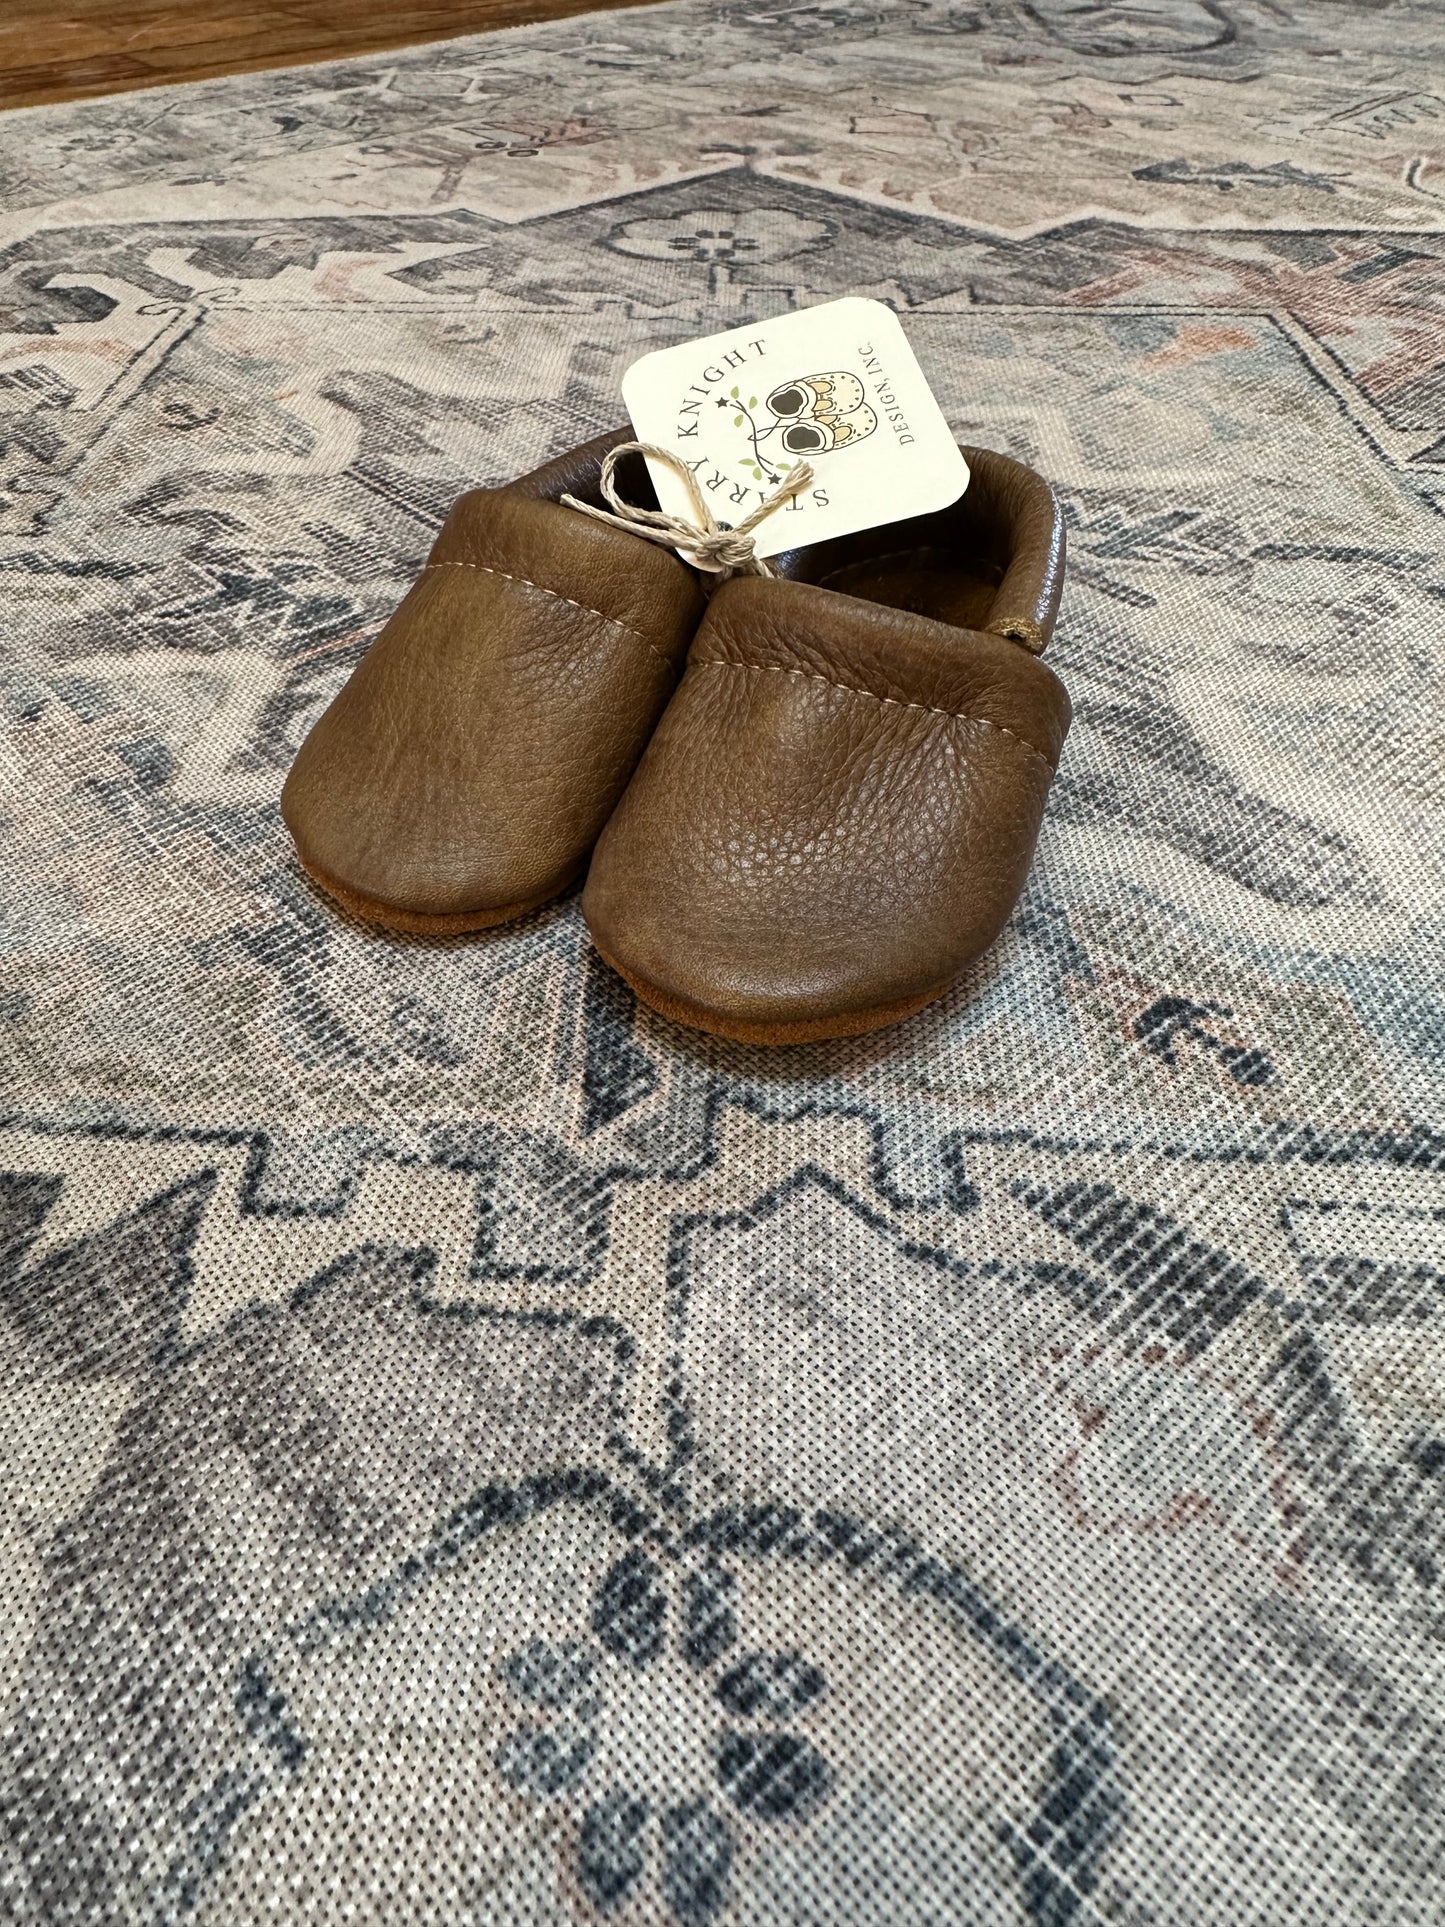 Loafers (Baby Booties)